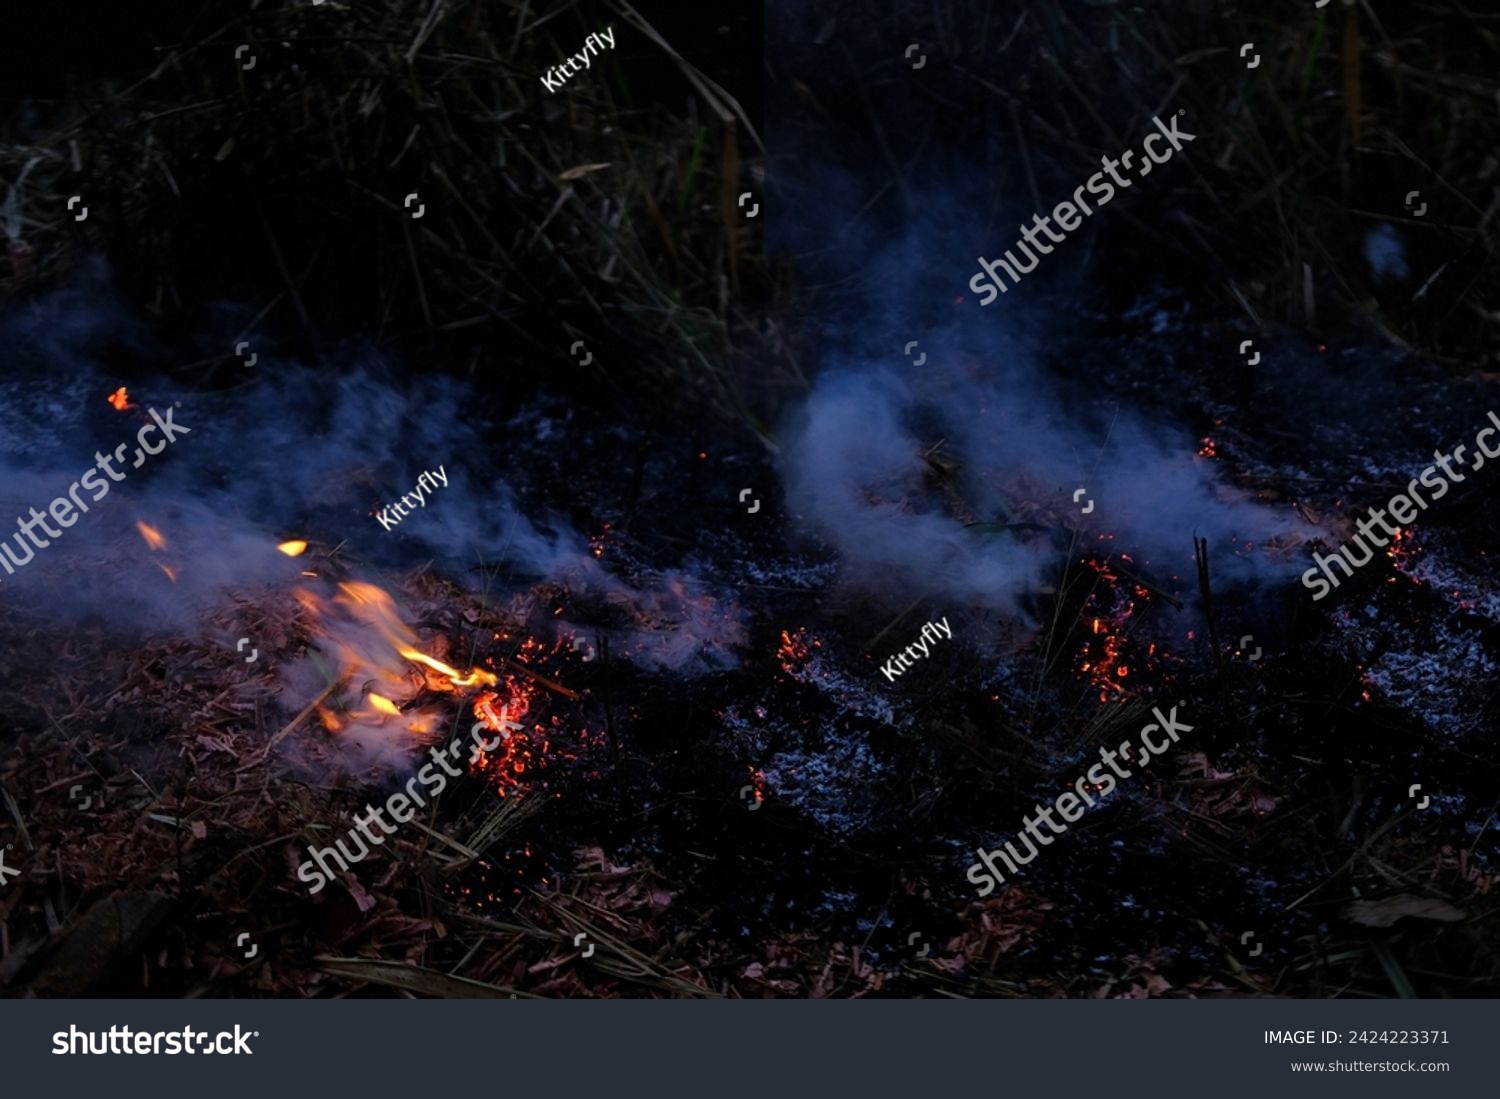 burning conflagration, burning ash, charred dry grass in forest, acrid gray smoke, wildfire, rural fire unplanned, uncontrolled and unpredictable fire in area combustible vegetation, harming nature #2424223371